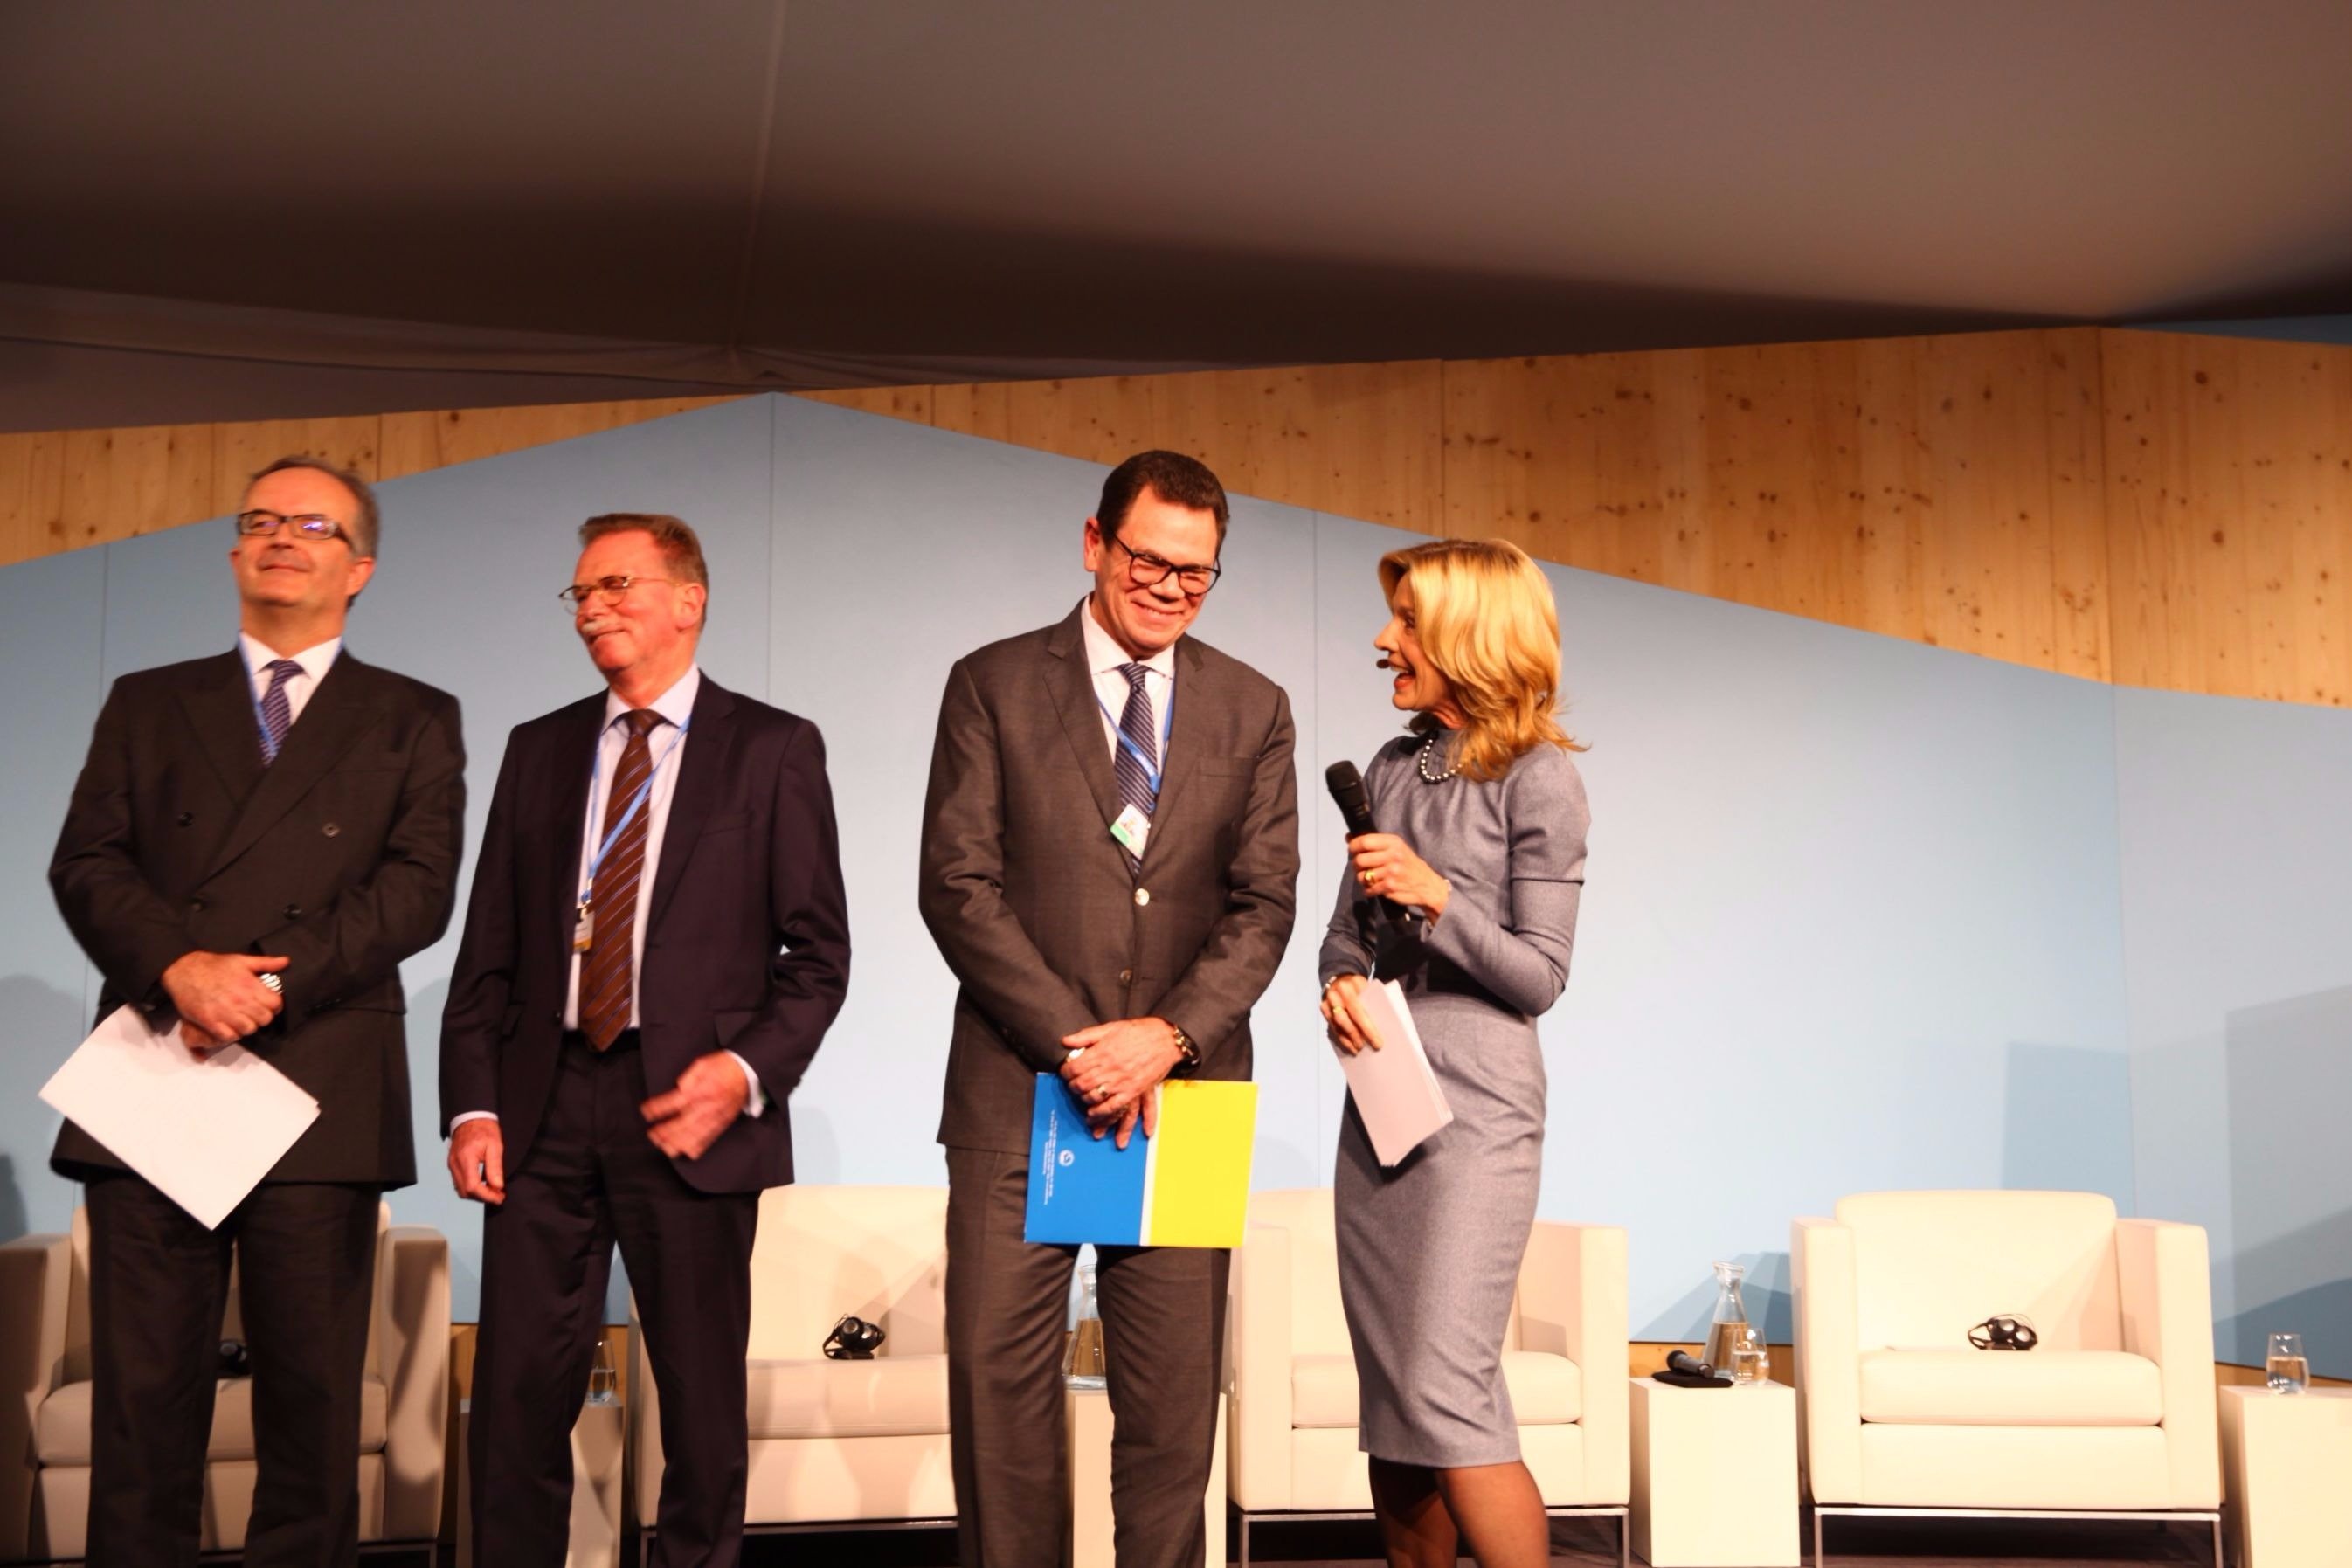 CDB President, Dr. Wm. Warren Smith (third from left) chats with moderator, Melinda Crane (right), during the COP23 Presidency Event, “Towards a resilient future: Frontiers of risk sharing” on November 14, 2017 in Bonn, Germany.